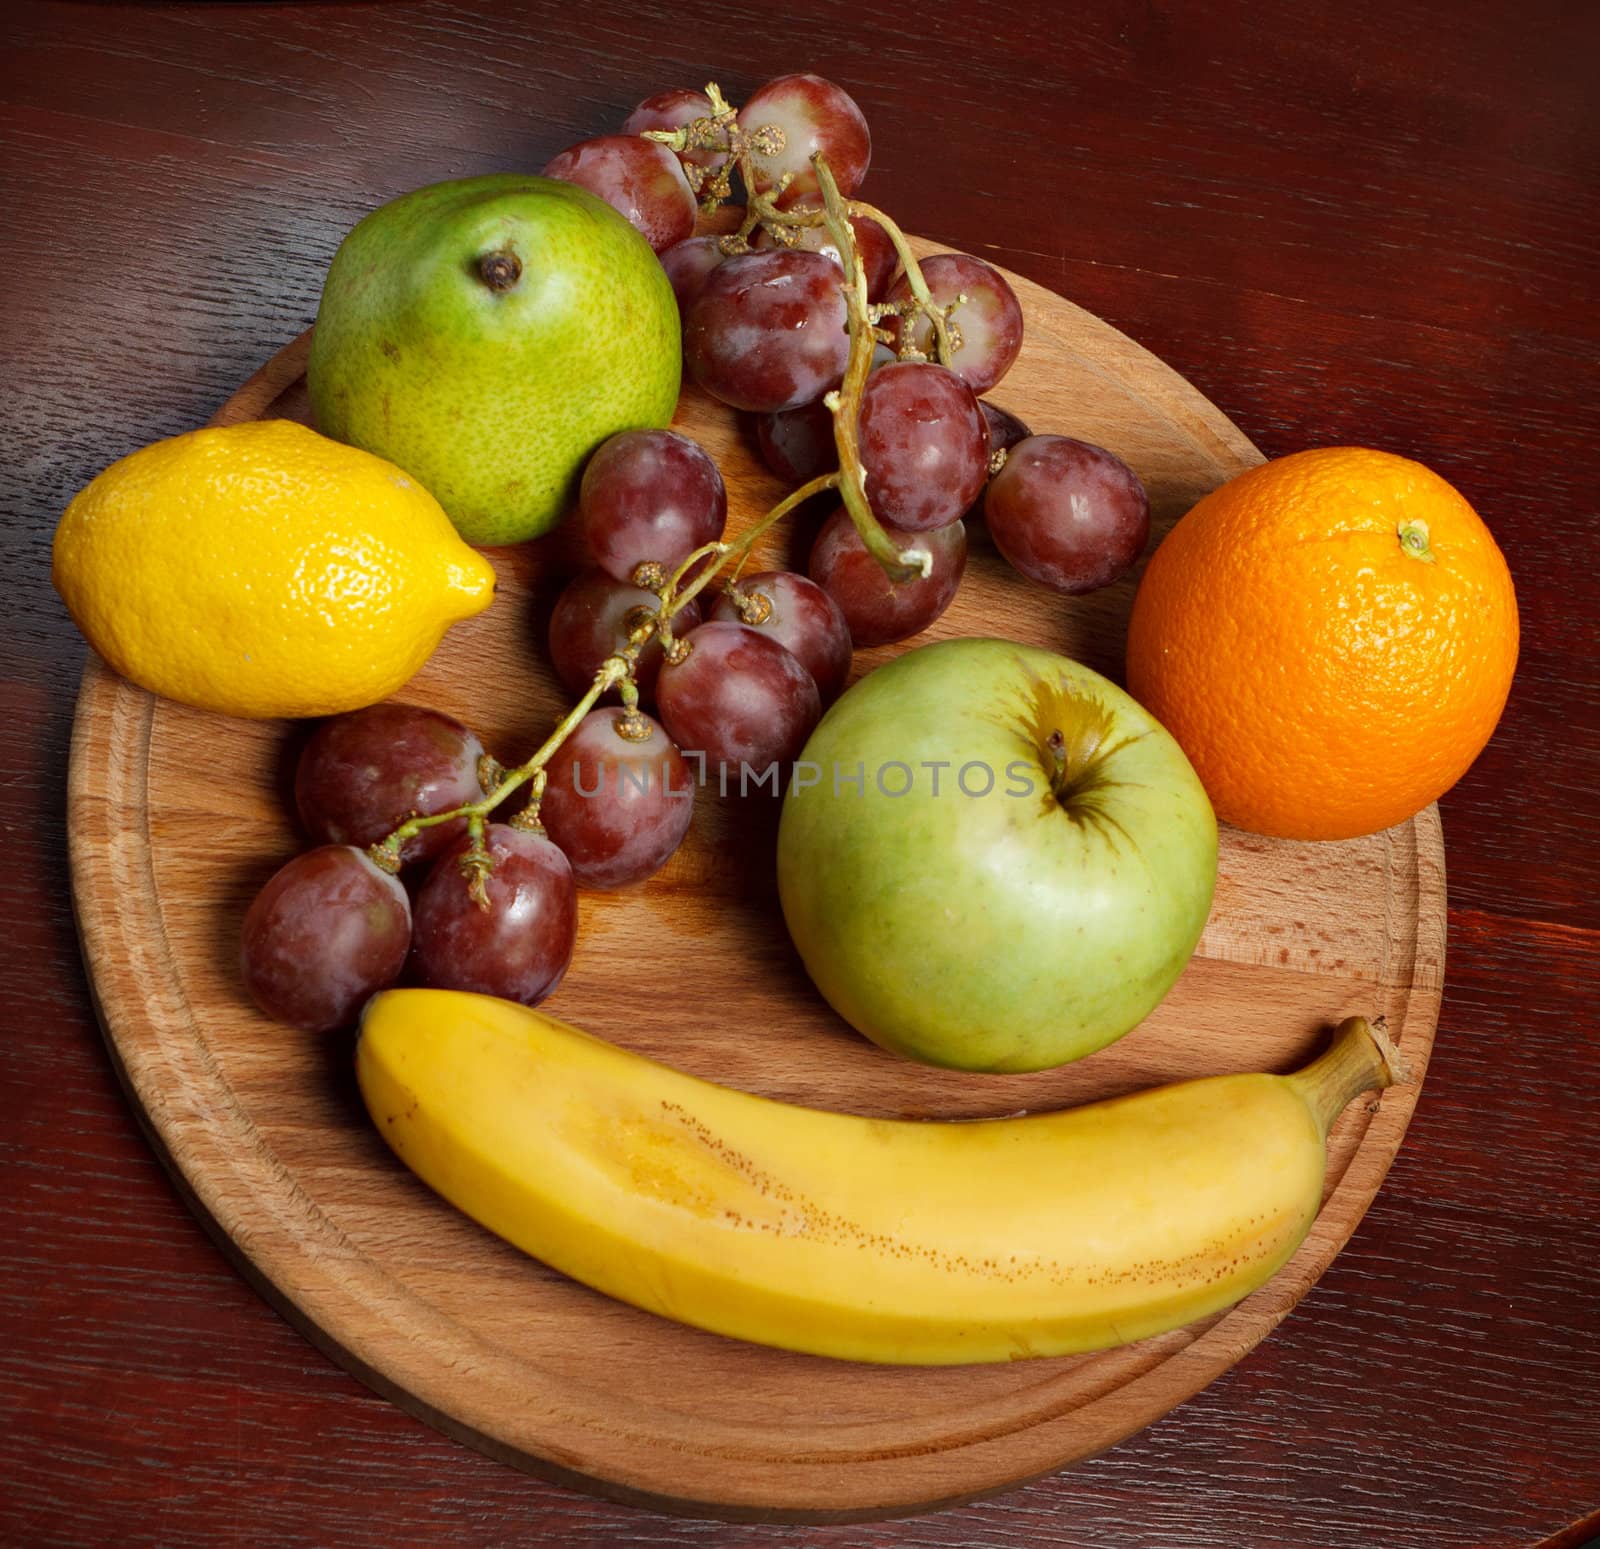 The fruit, a wooden Board on the background of a wooden table.